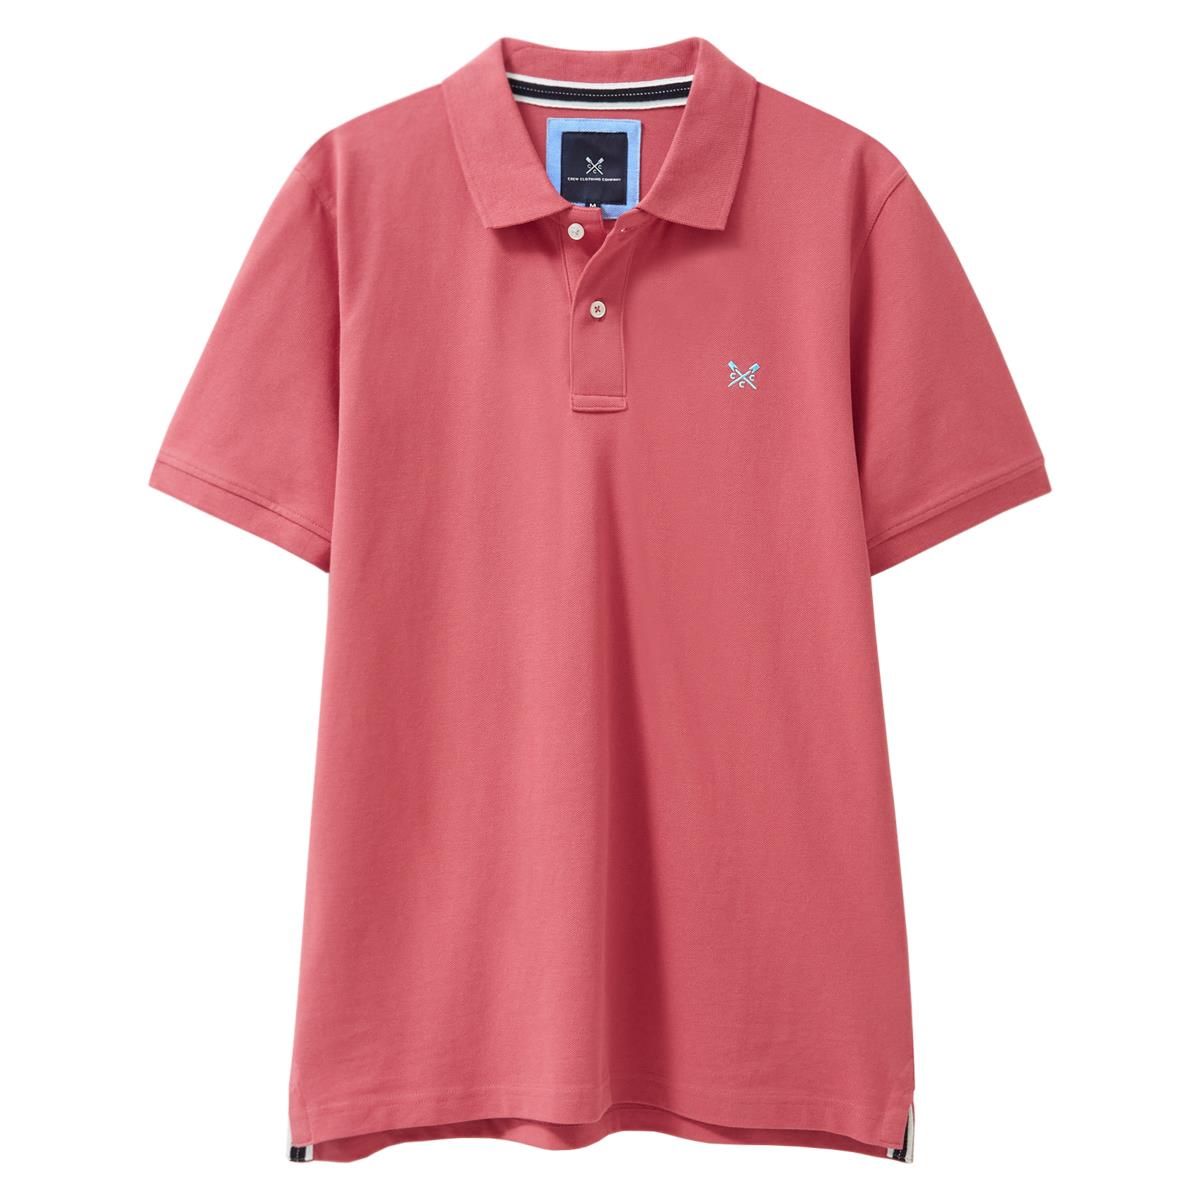 Are Crew Clothing's pique polo shirts comfortable to wear?